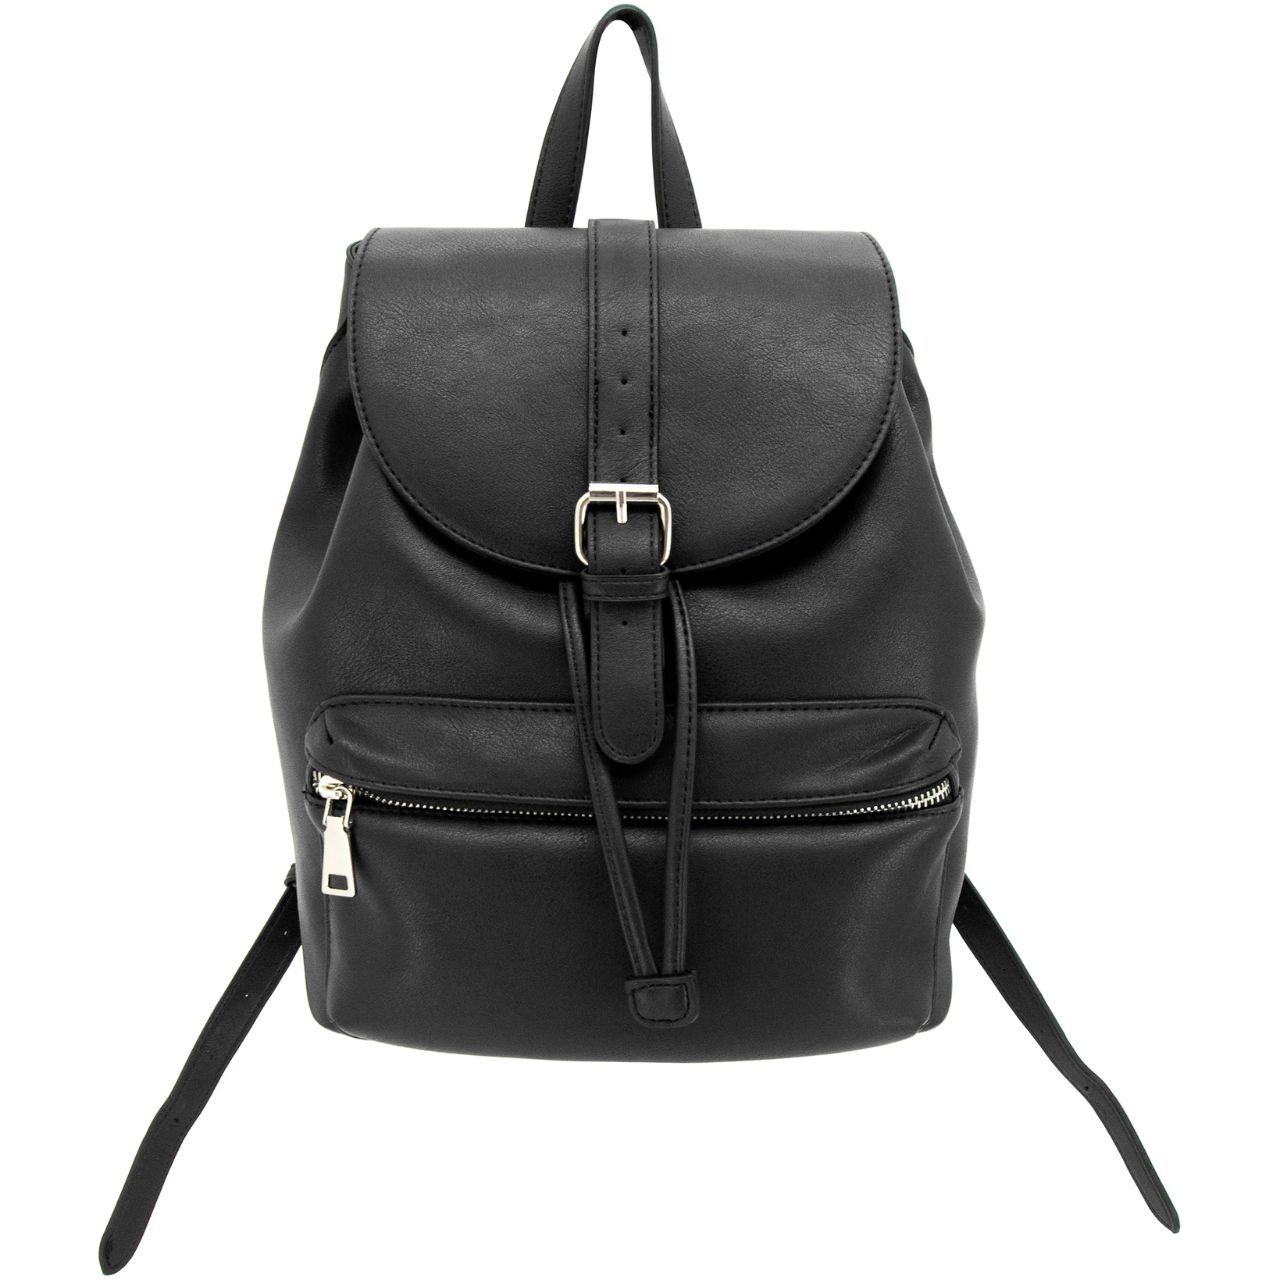 Black colored "Amelia" concealed carry backpack